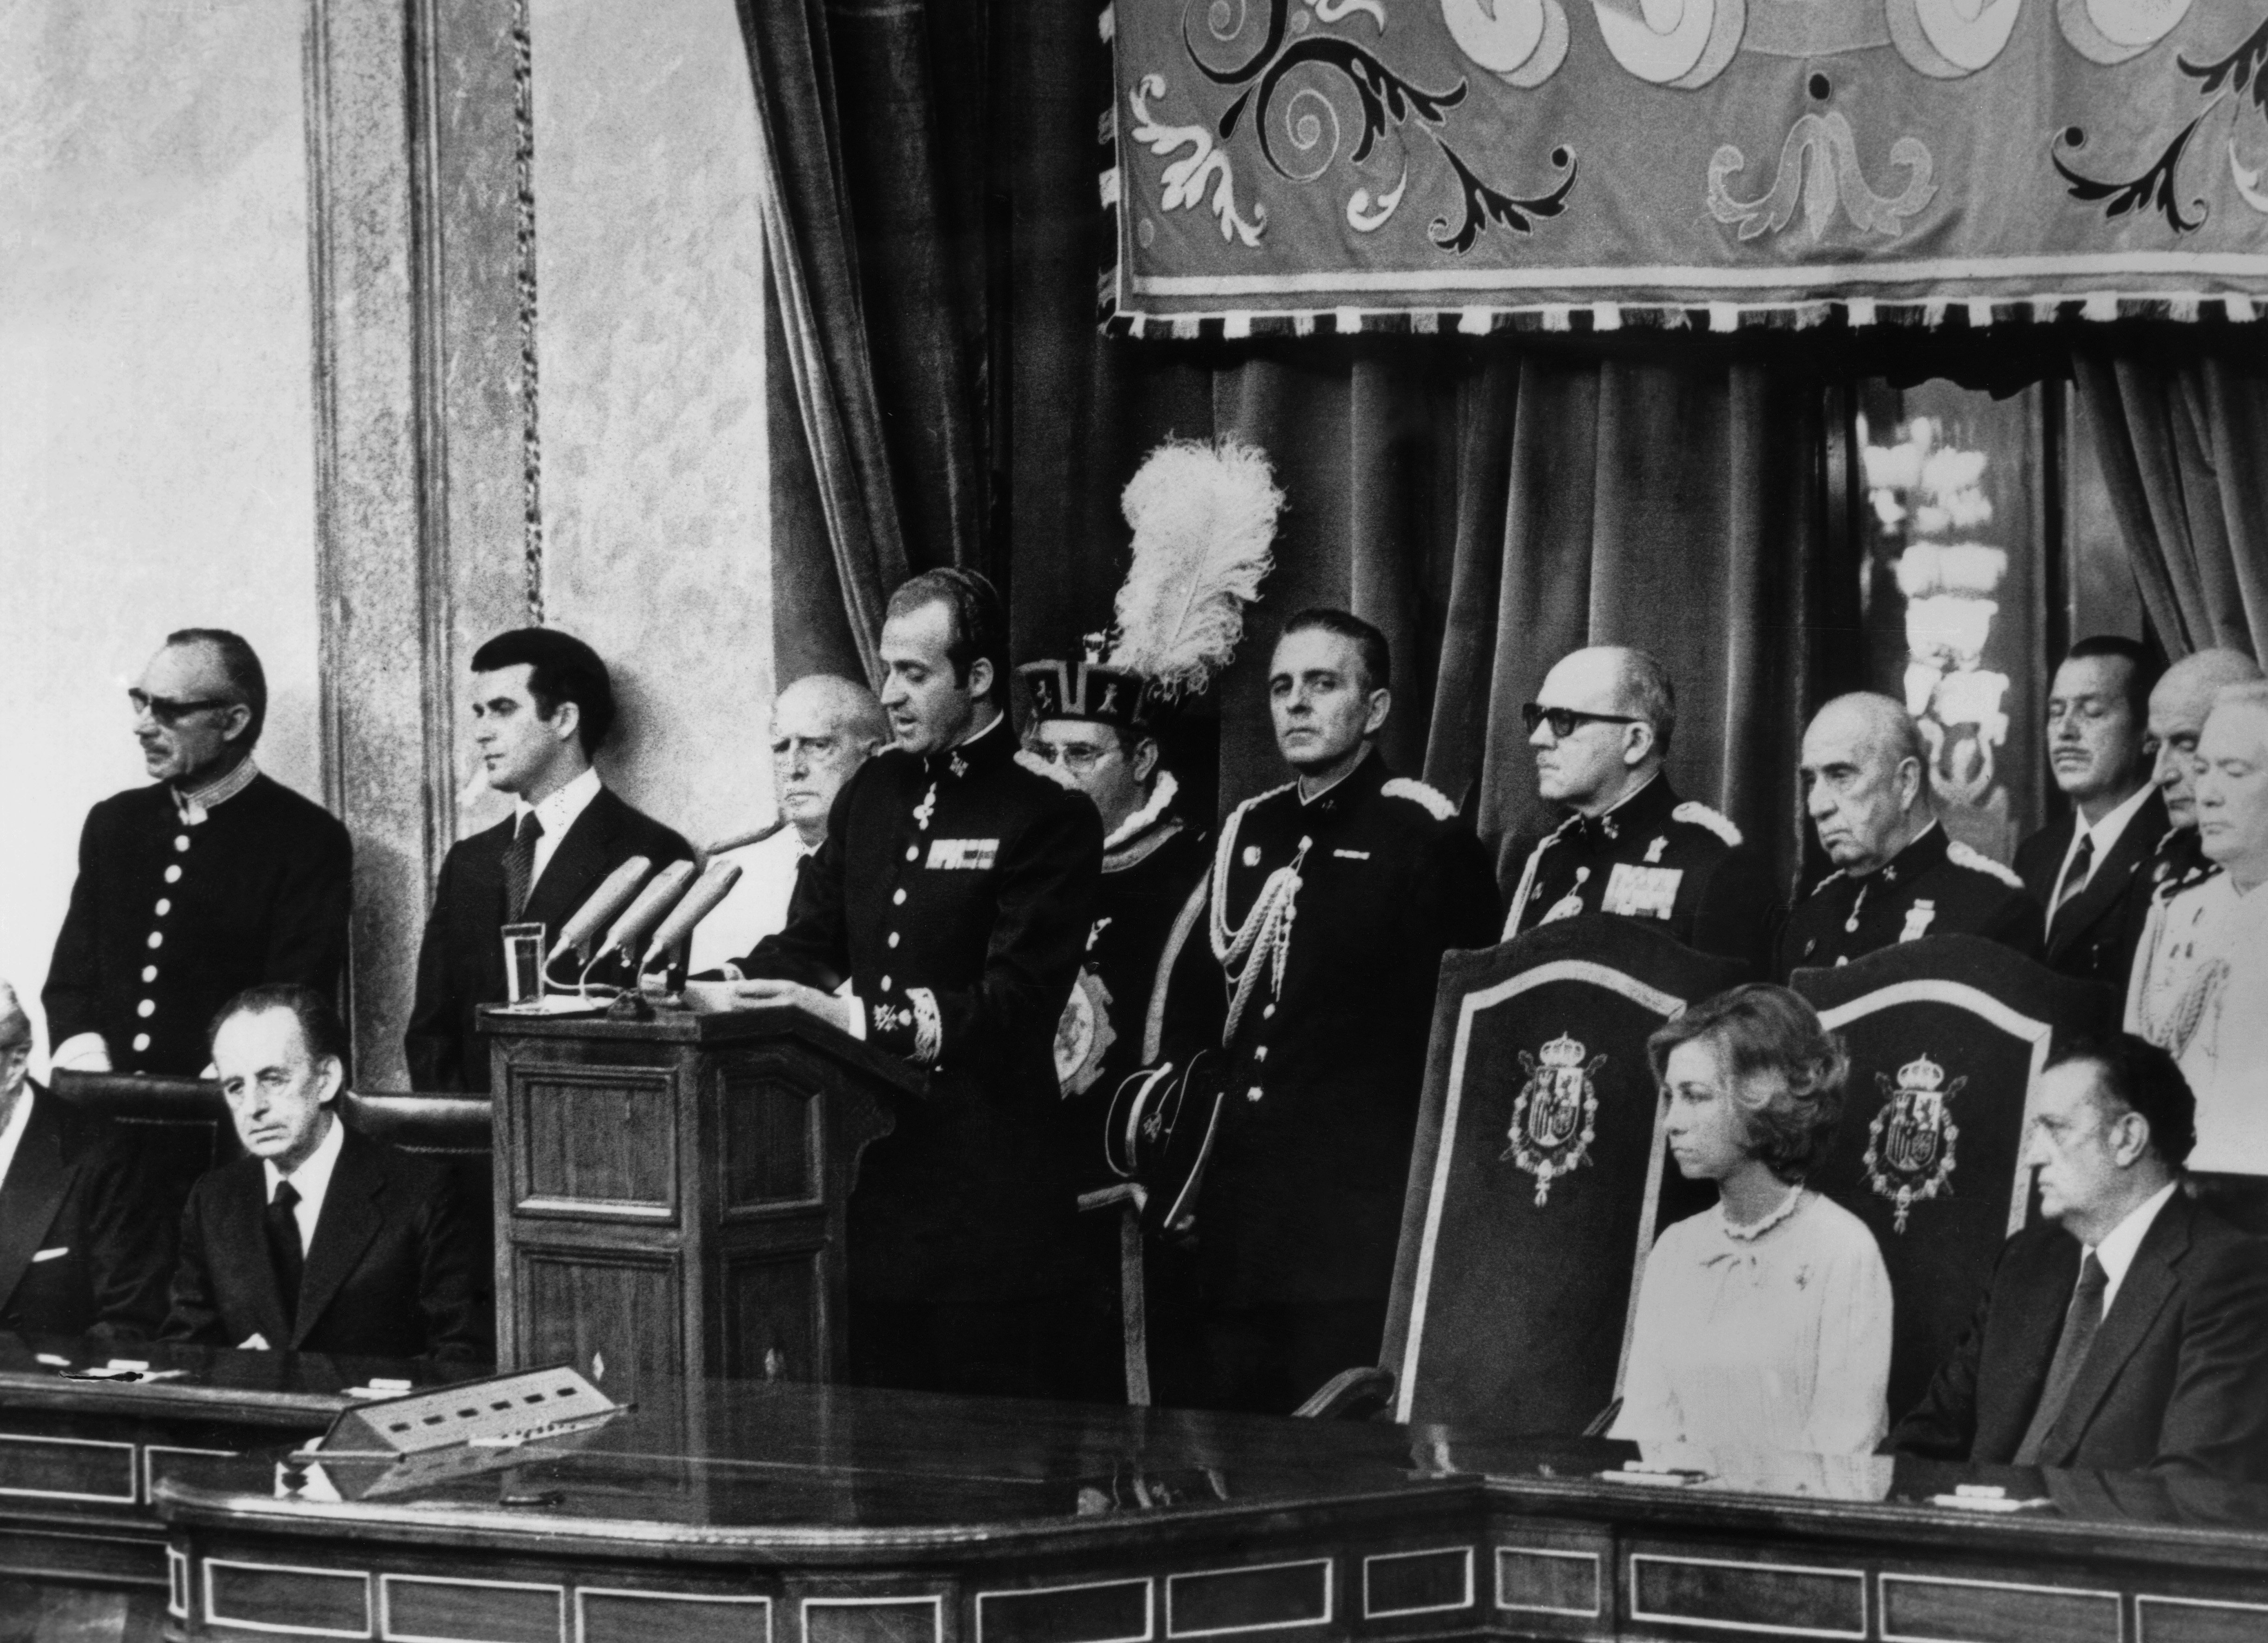 King Juan Carlos I of Spain inaugurating the first democratically-elected Spanish Cortes, in the presence of 800 deputies and senators and his wife Queen Sofia on July 27, 1977. | Source: Getty Images